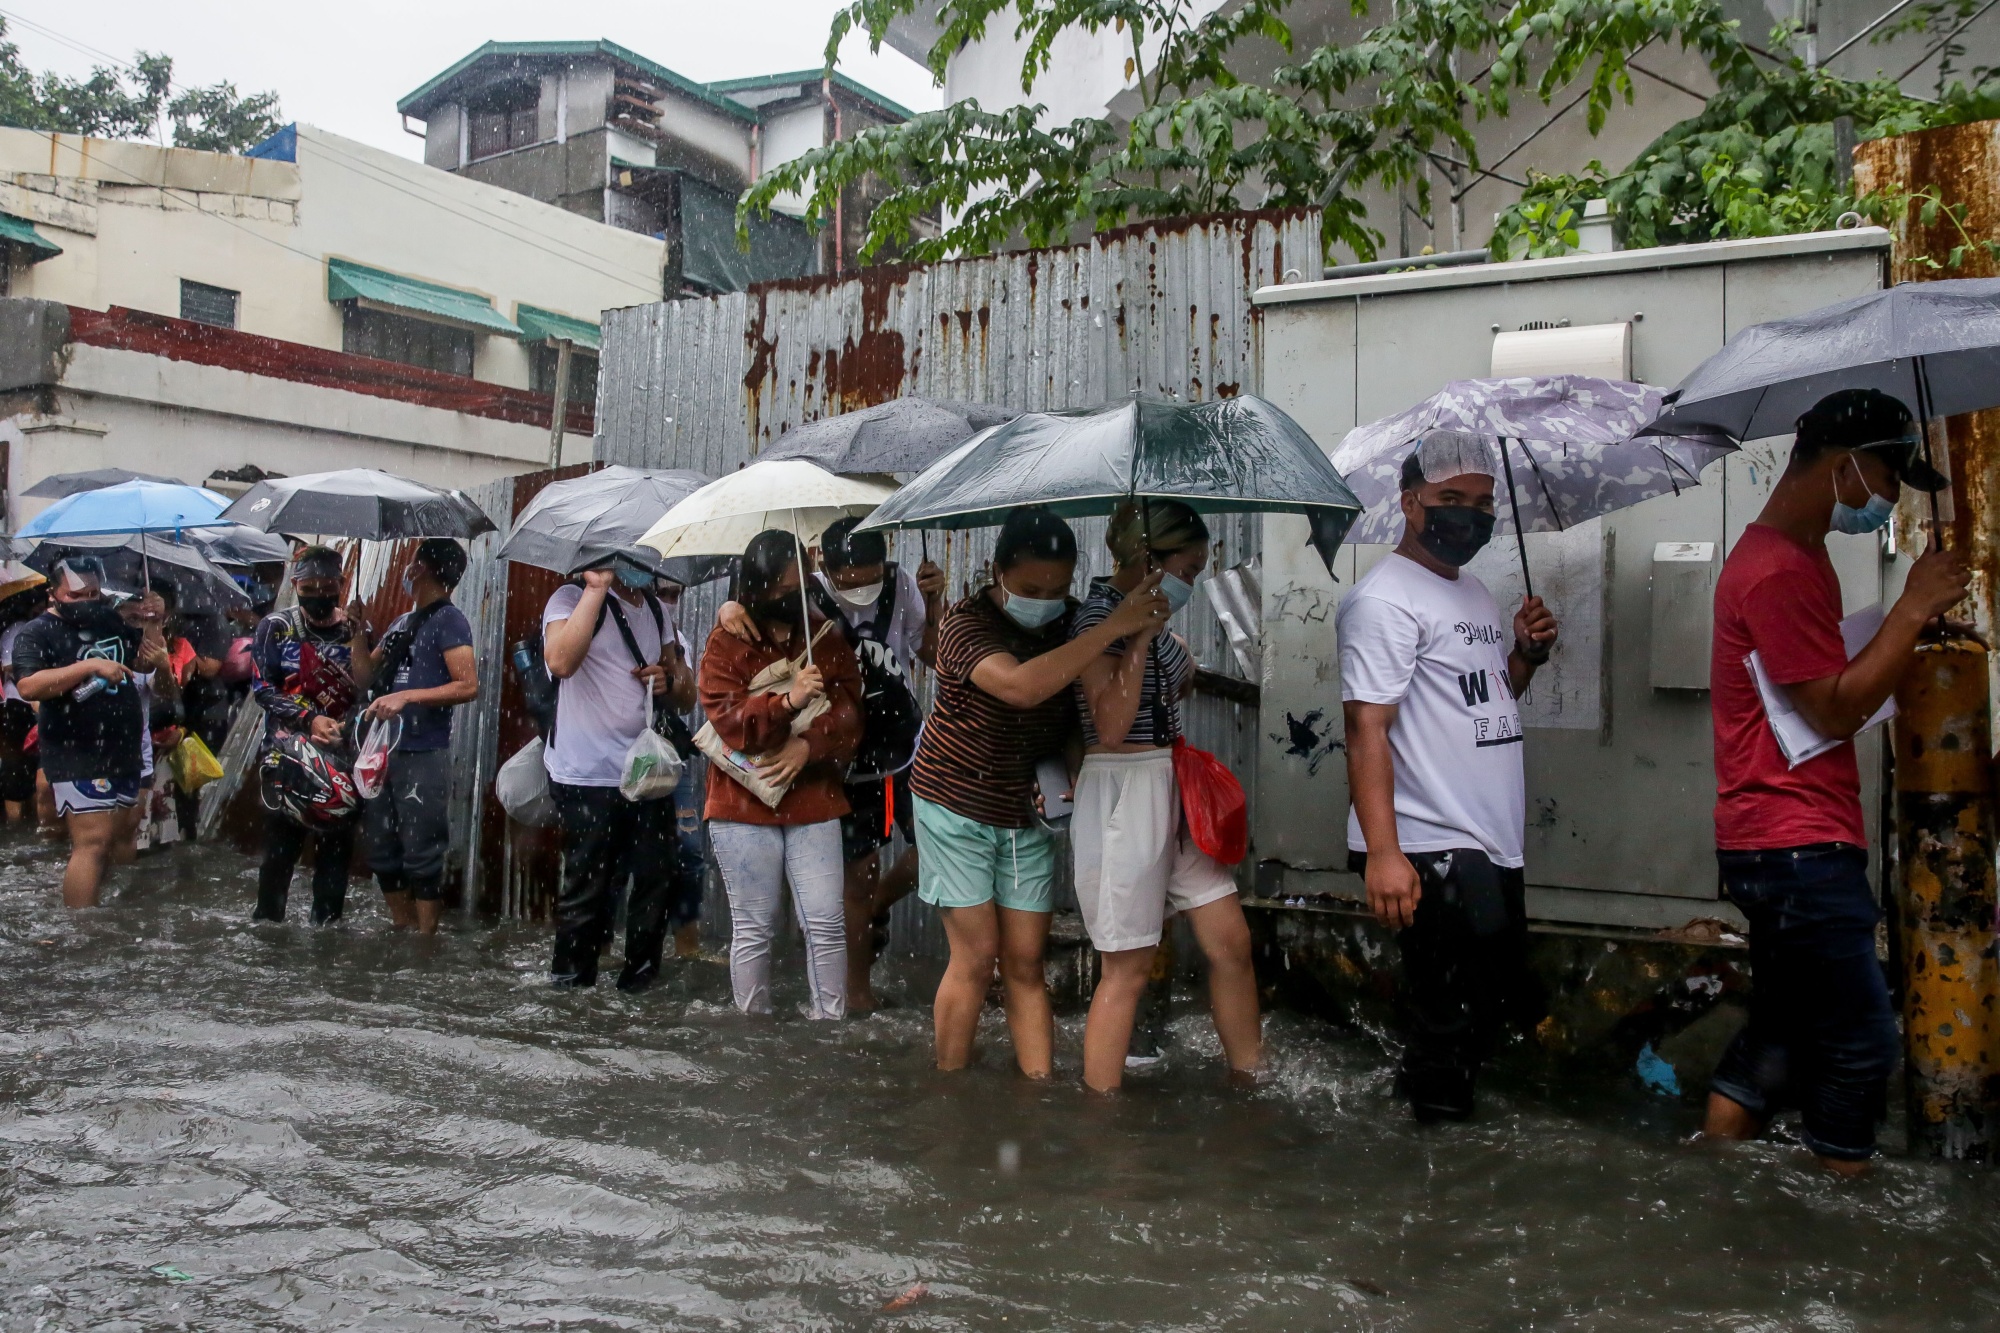 Monsoon Rains Flood Philippines as Thousands Are Evacuated Bloomberg